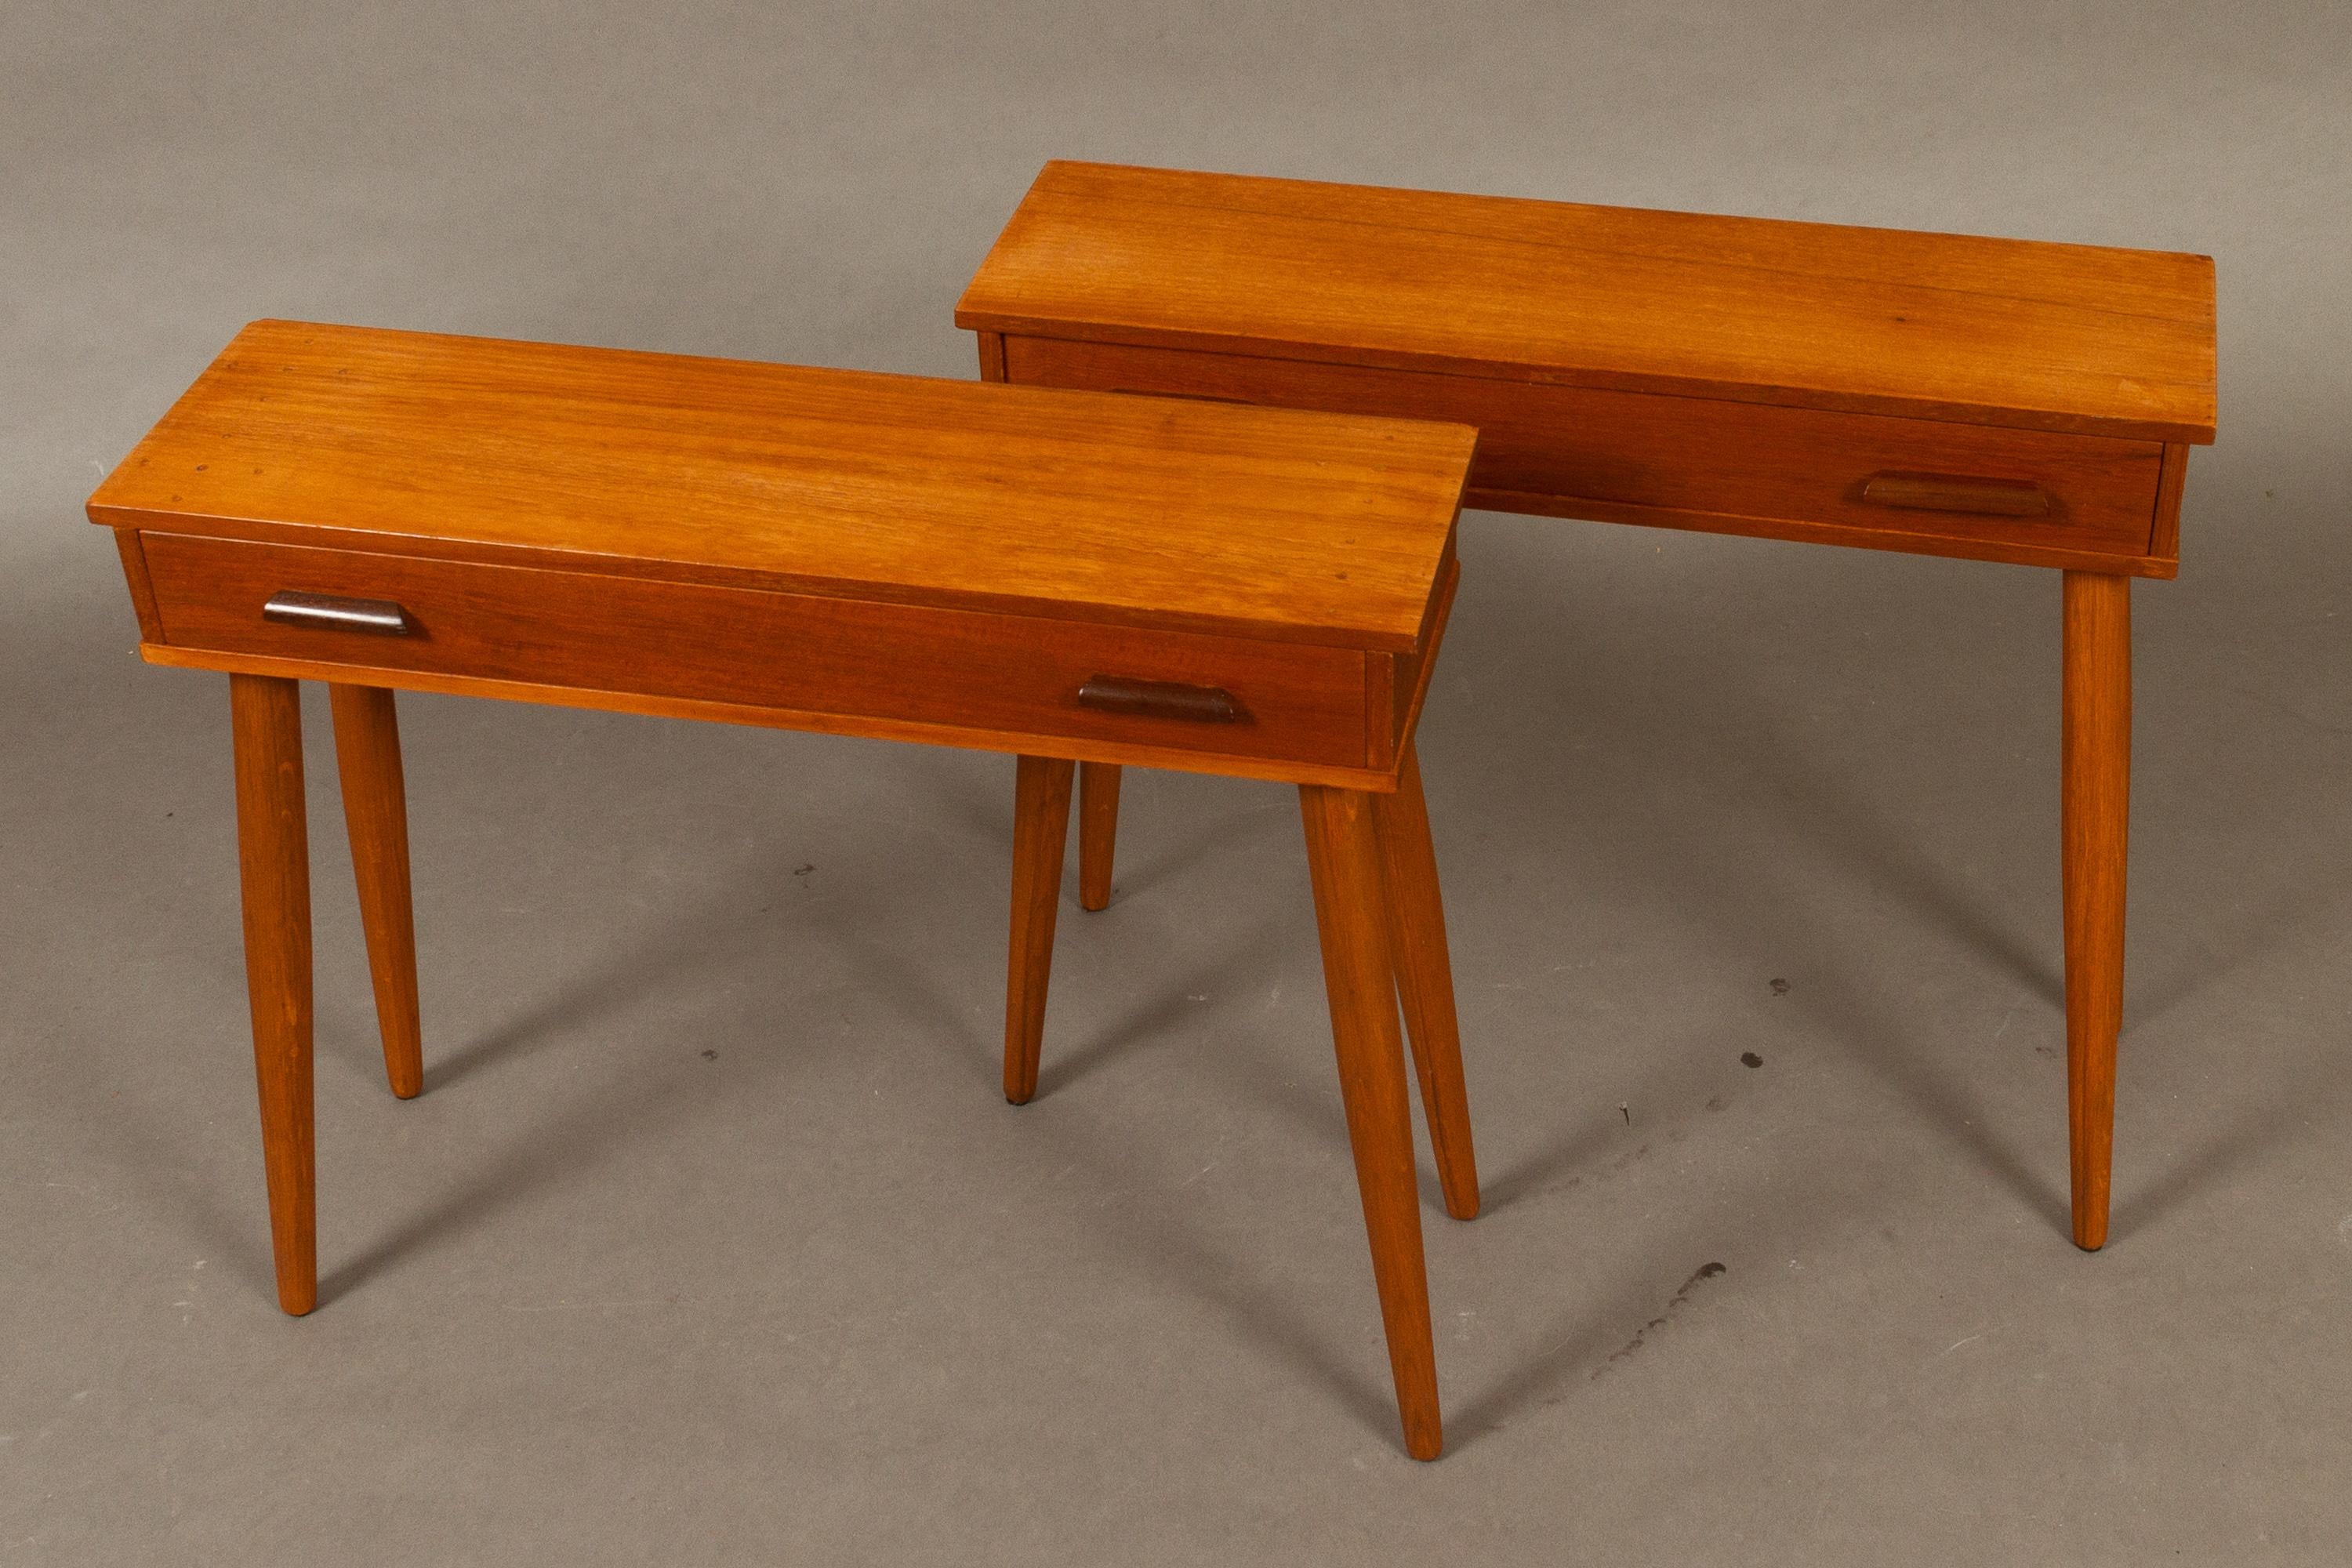 Danish Vintage Teak Night Stands 1960s Set of 2.
Pair of matching bedside tables with wide drawer. Long round tapered legs (not original!) Also suitable as console or side tables.
Veneer on top has several marks and small holes, some damage to